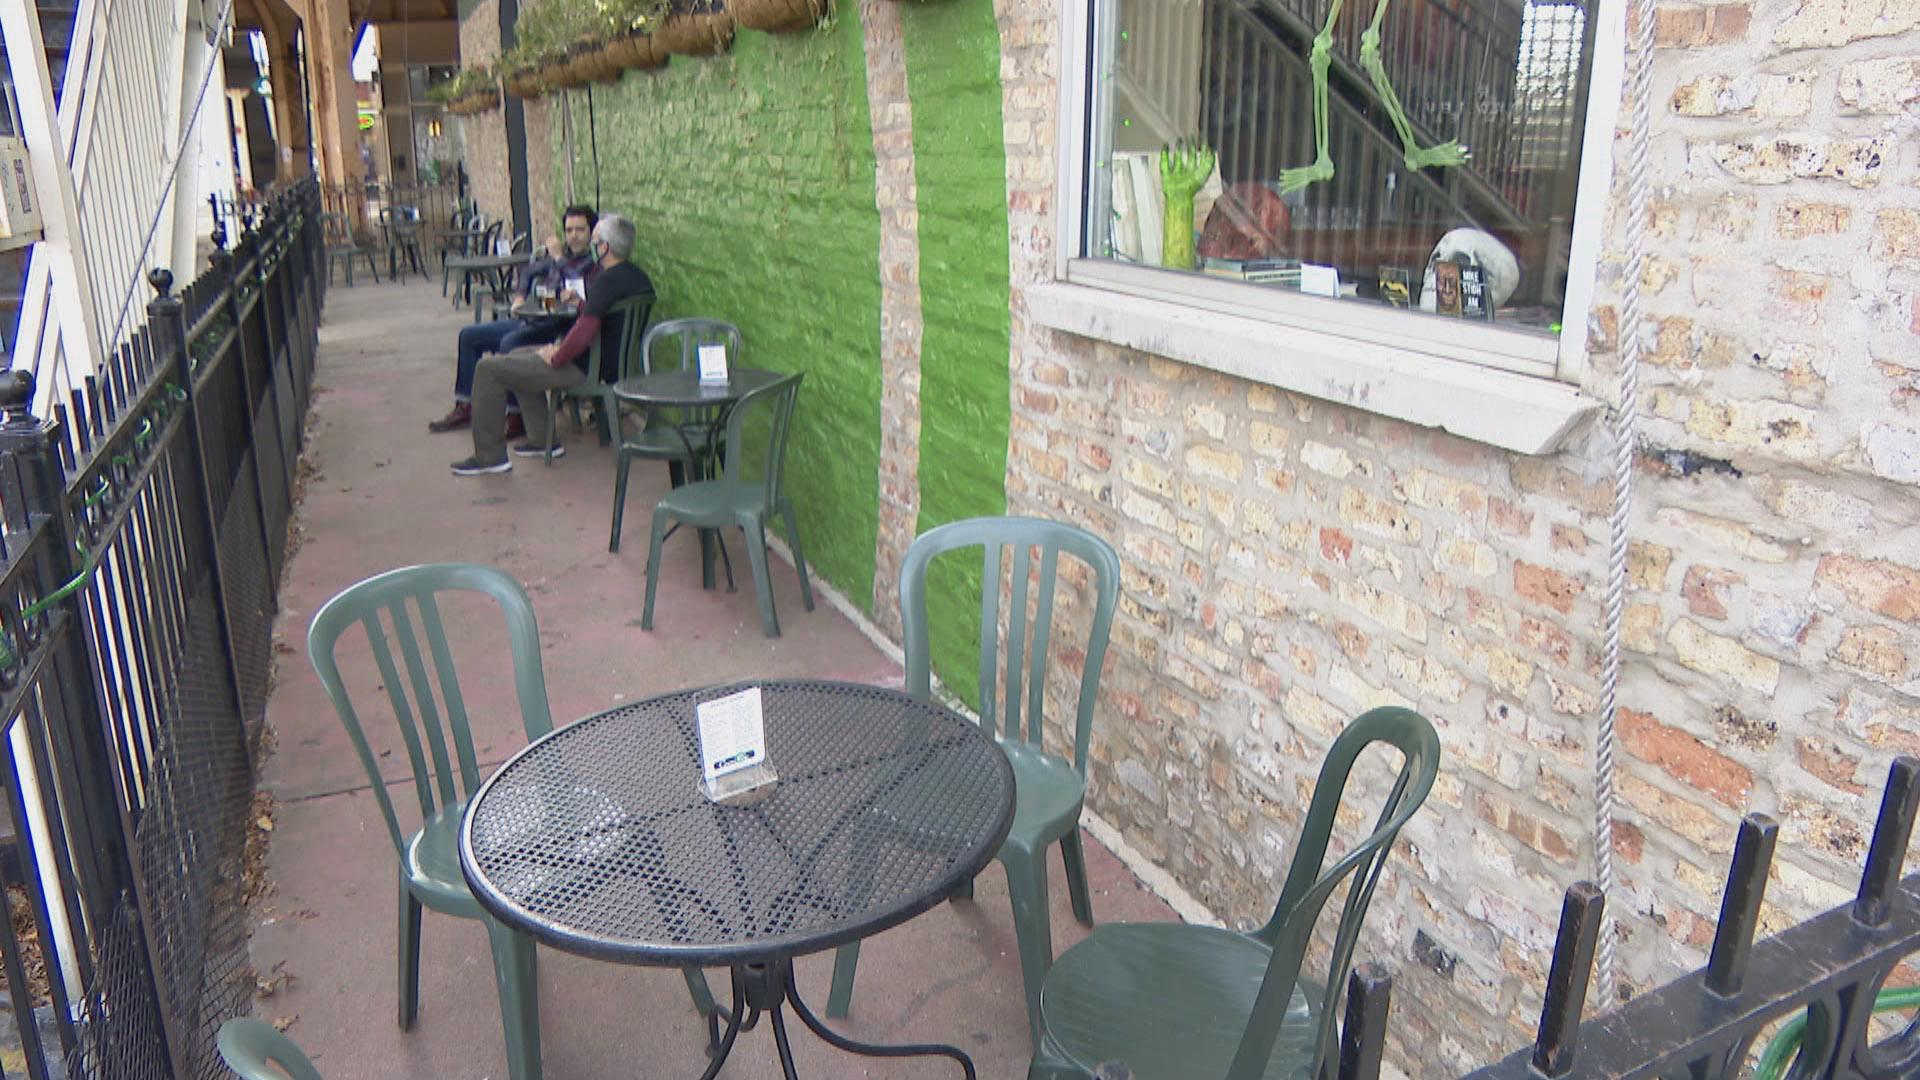 The patio at the Green Eye Lounge. (WTTW News)